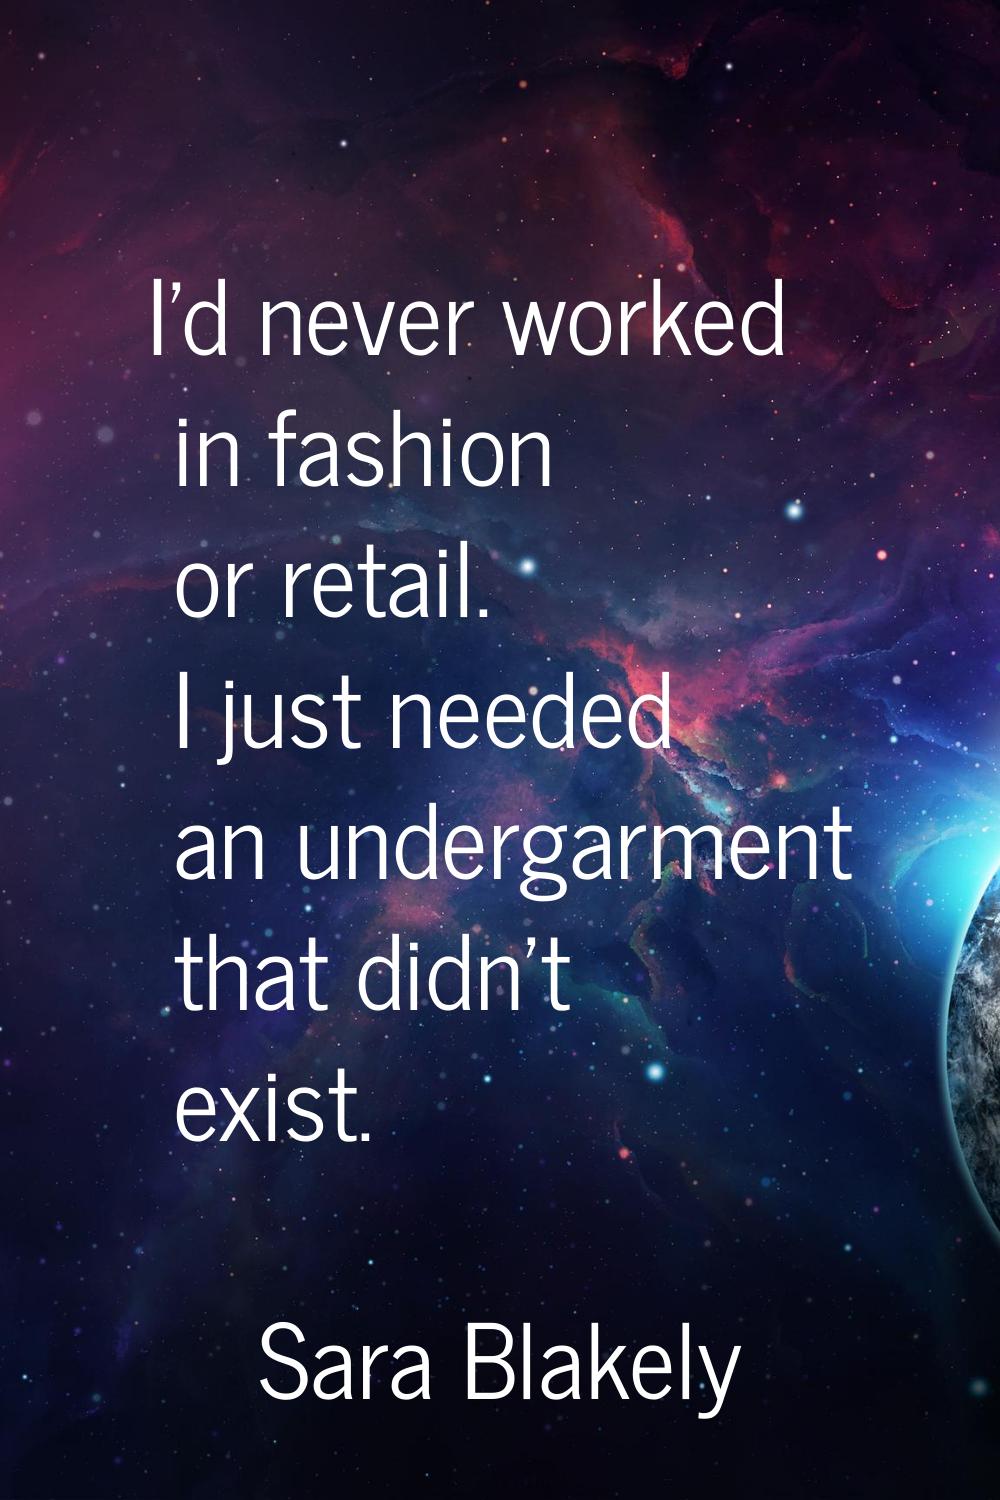 I'd never worked in fashion or retail. I just needed an undergarment that didn't exist.